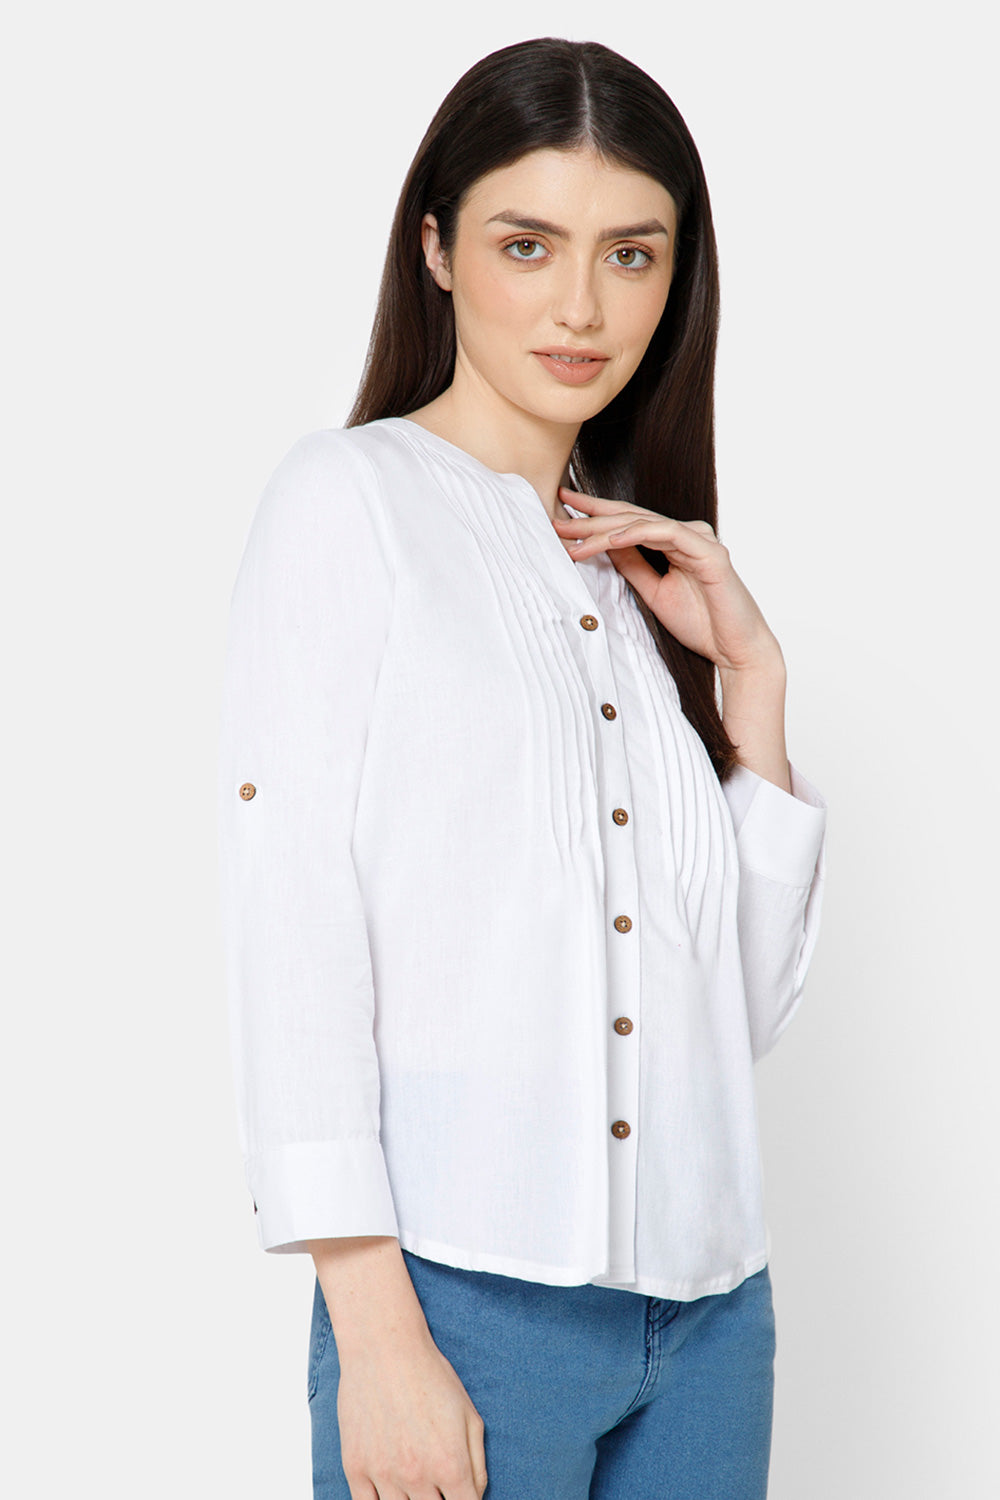 Mythri Women's Regular Casual top - White - TO20